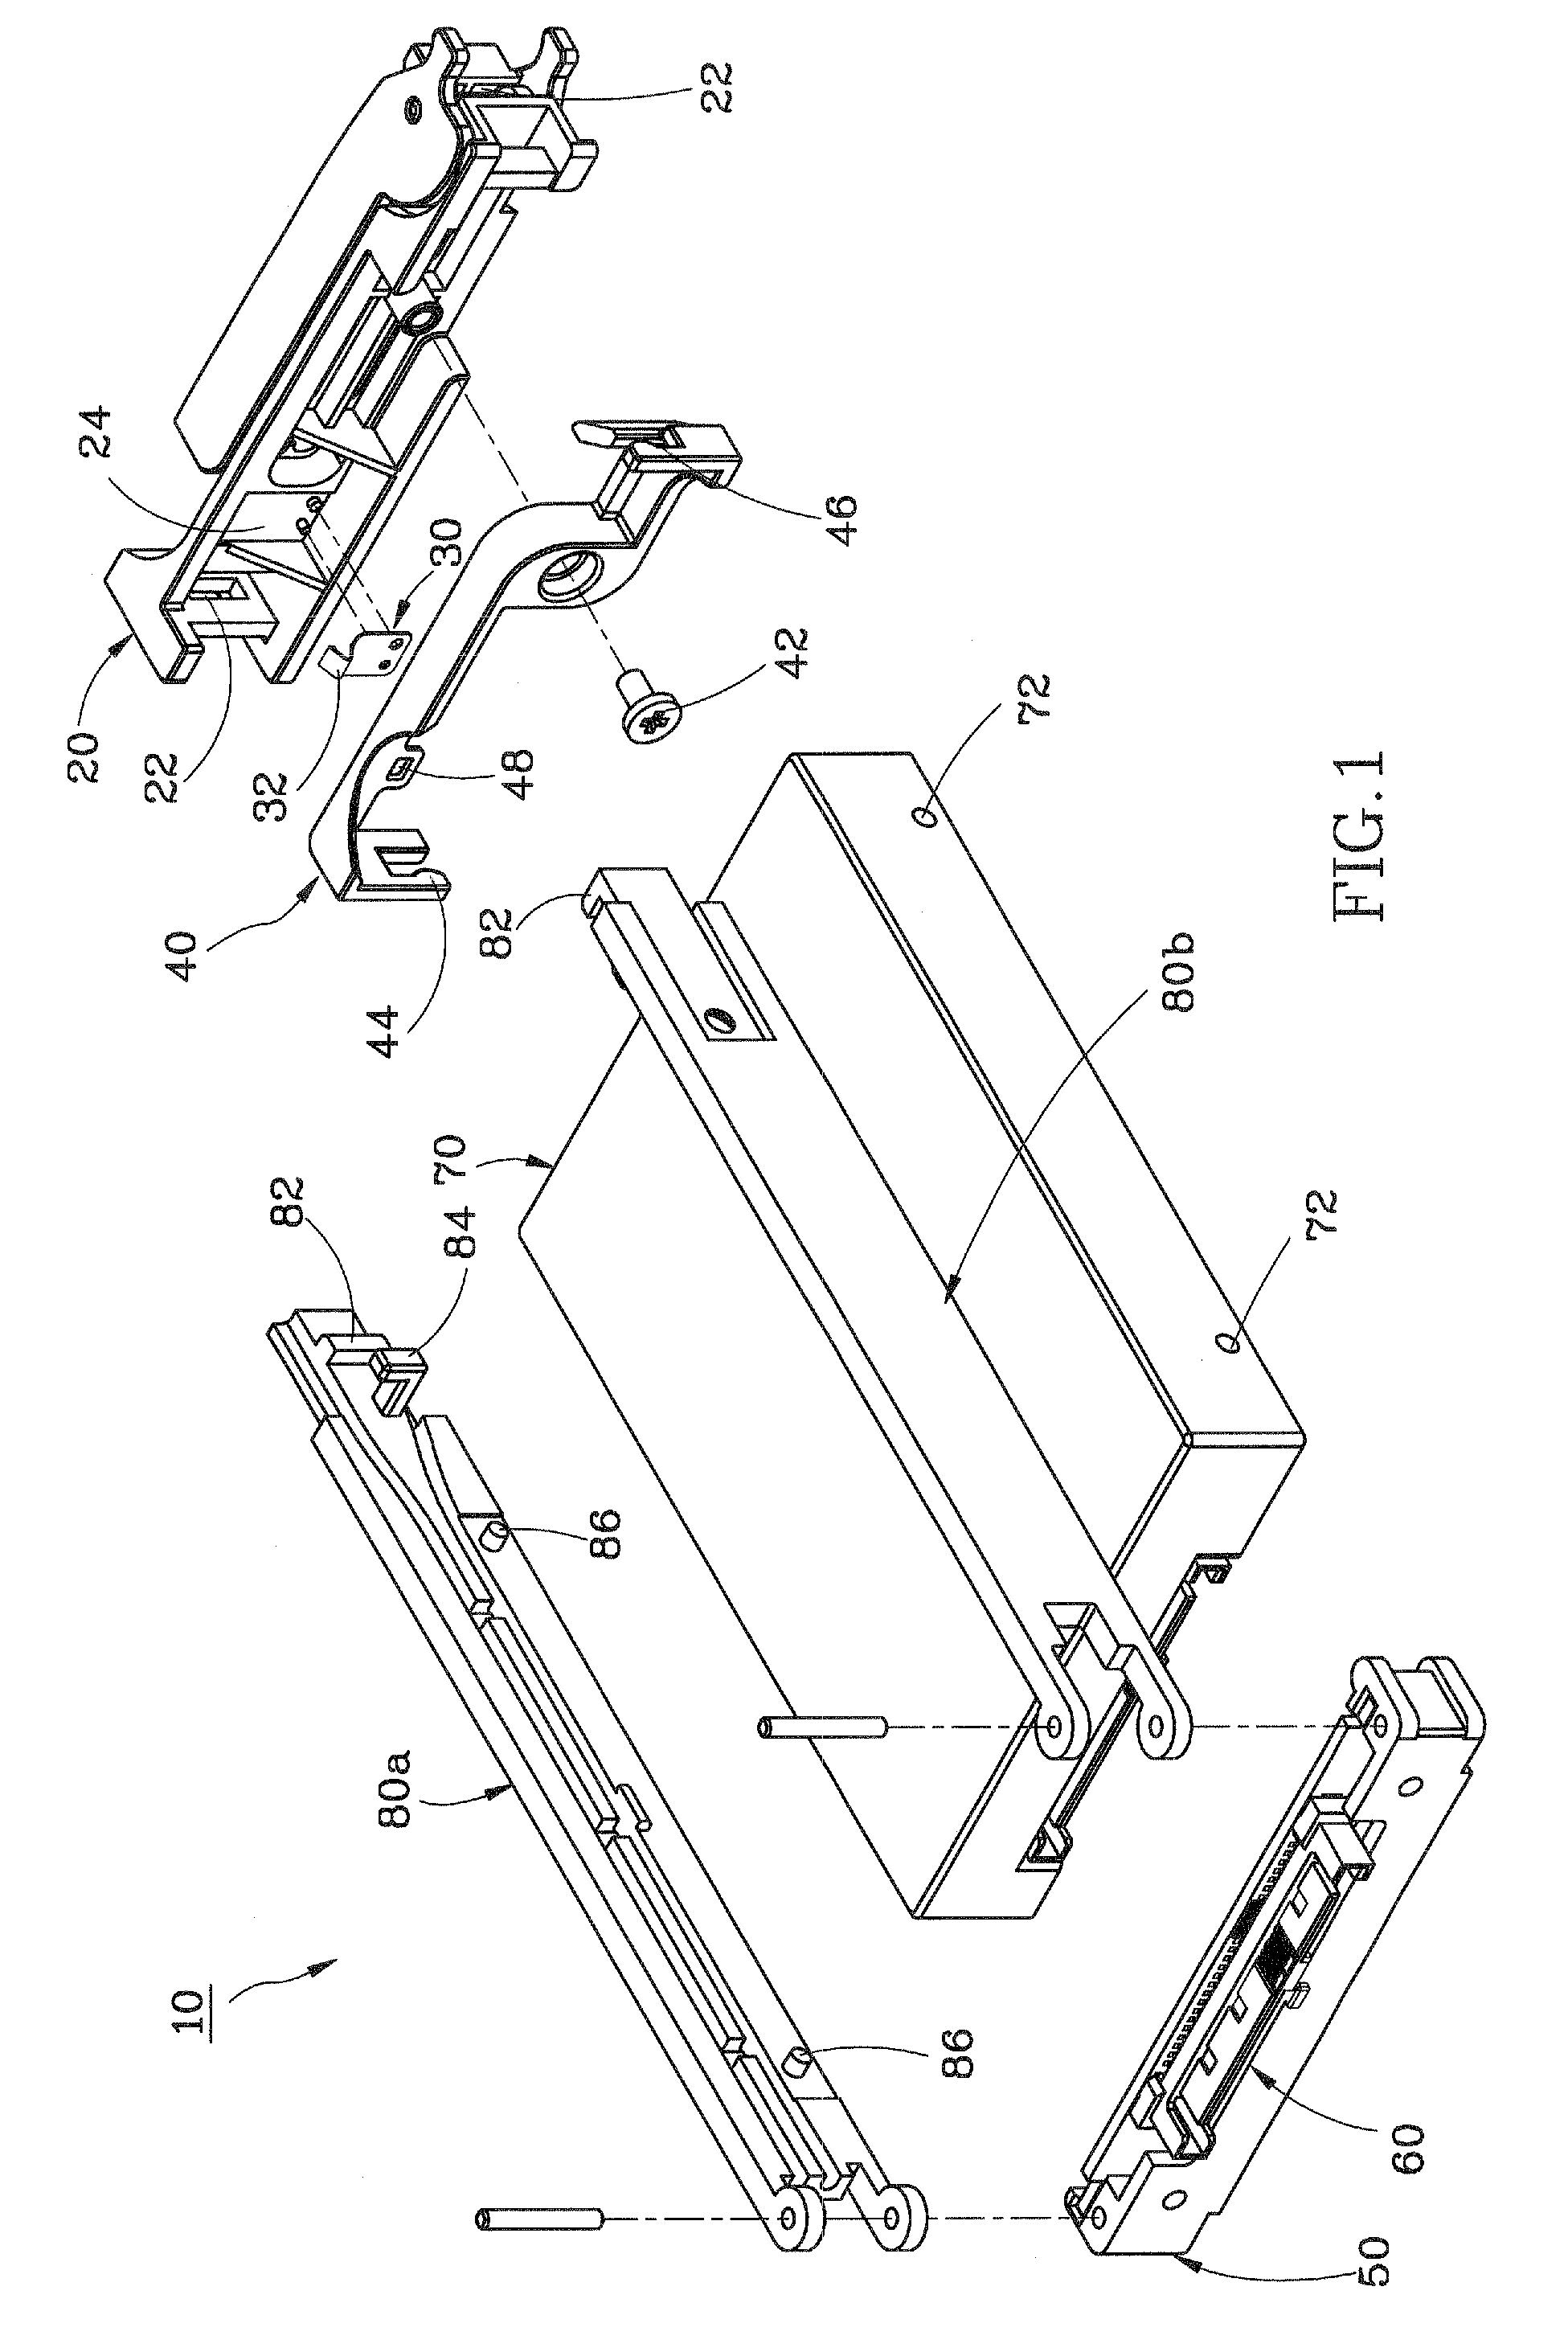 Removable disk drive mounting device including a first holder pivotally connected to second holders which in turn are detachably connected to a handle